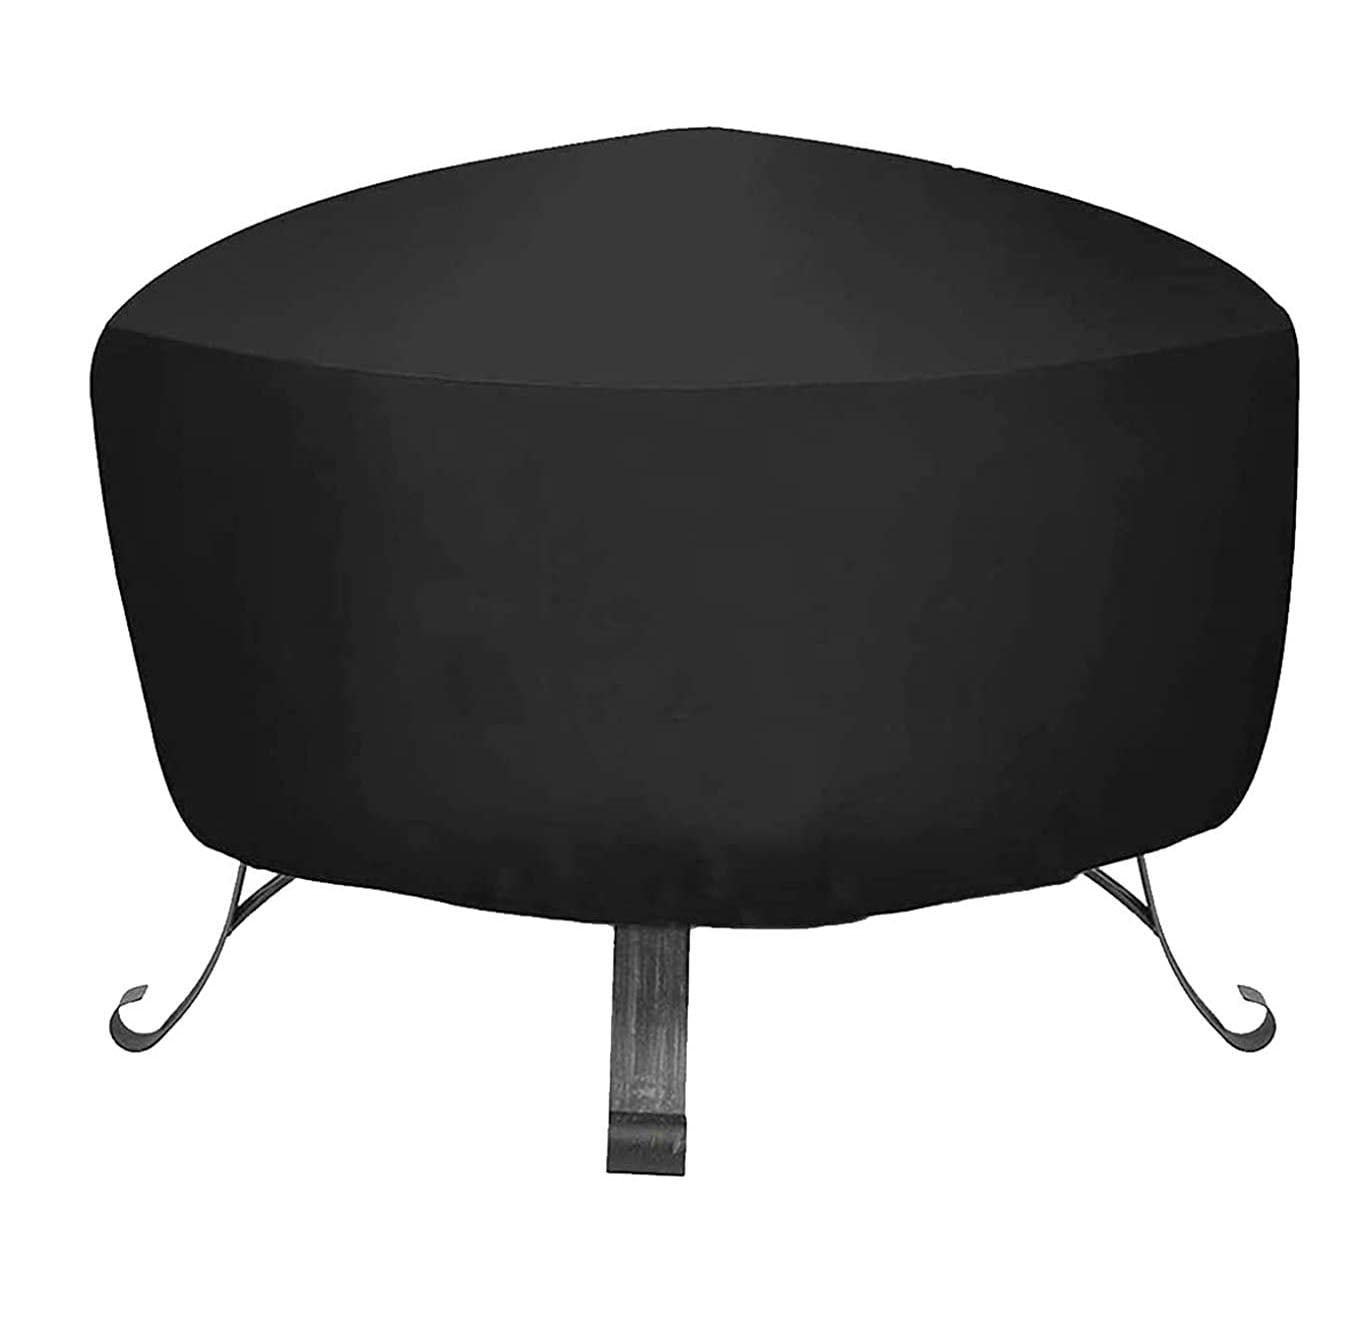 Fire Pit Cover Round-210D Oxford Cloth Heavy Duty Patio Outdoor Fire Pit TaO8J8 